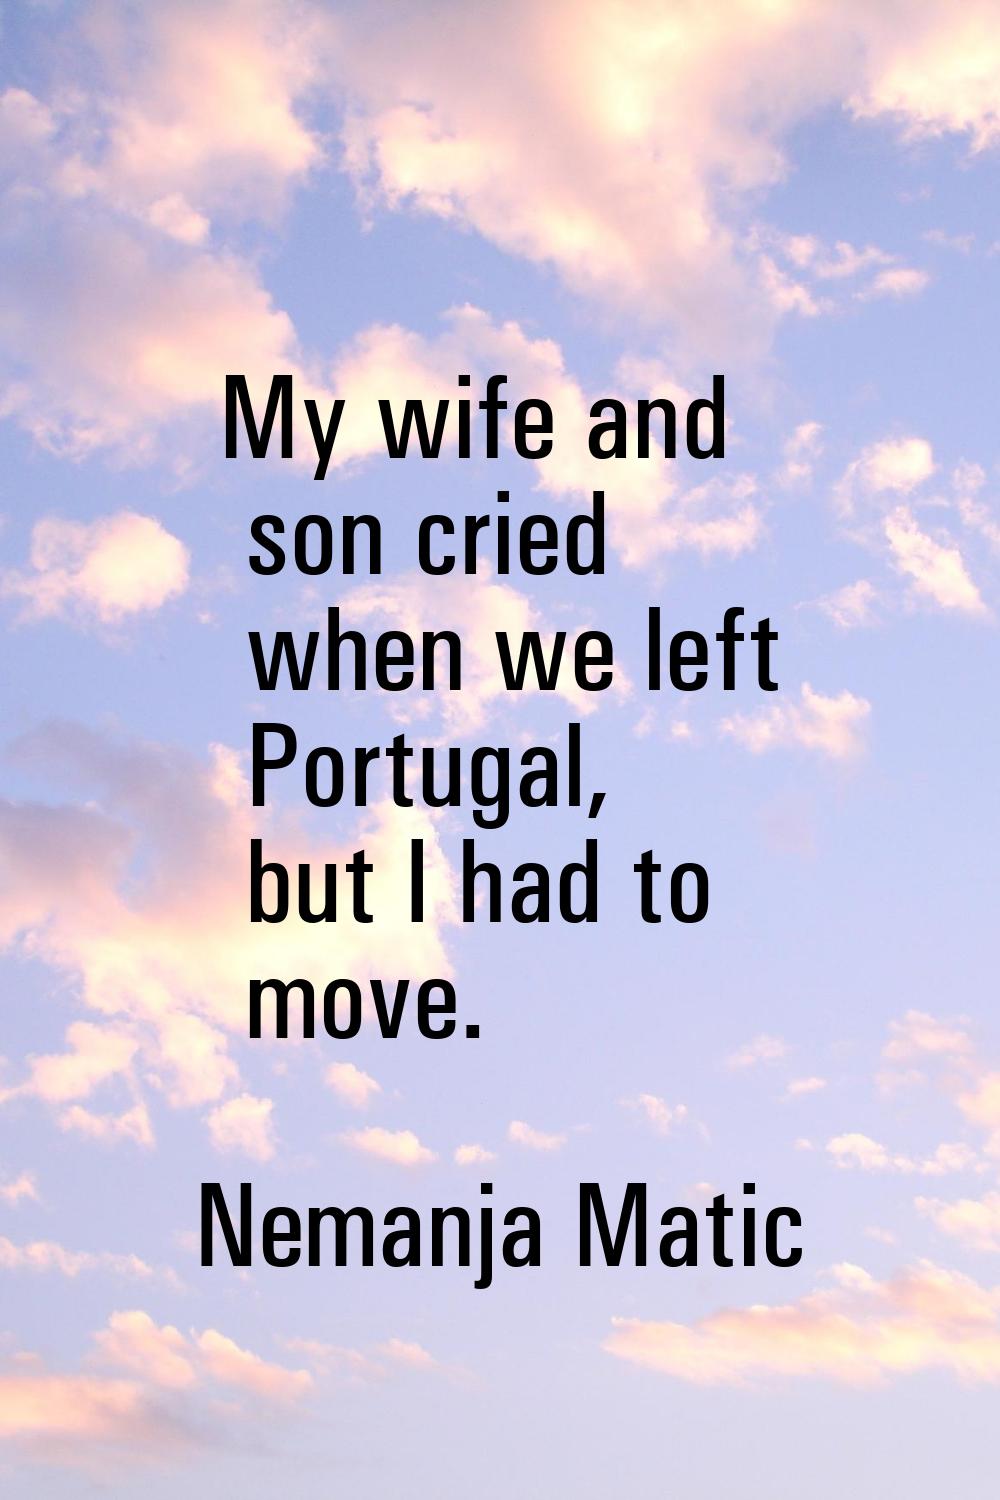 My wife and son cried when we left Portugal, but I had to move.